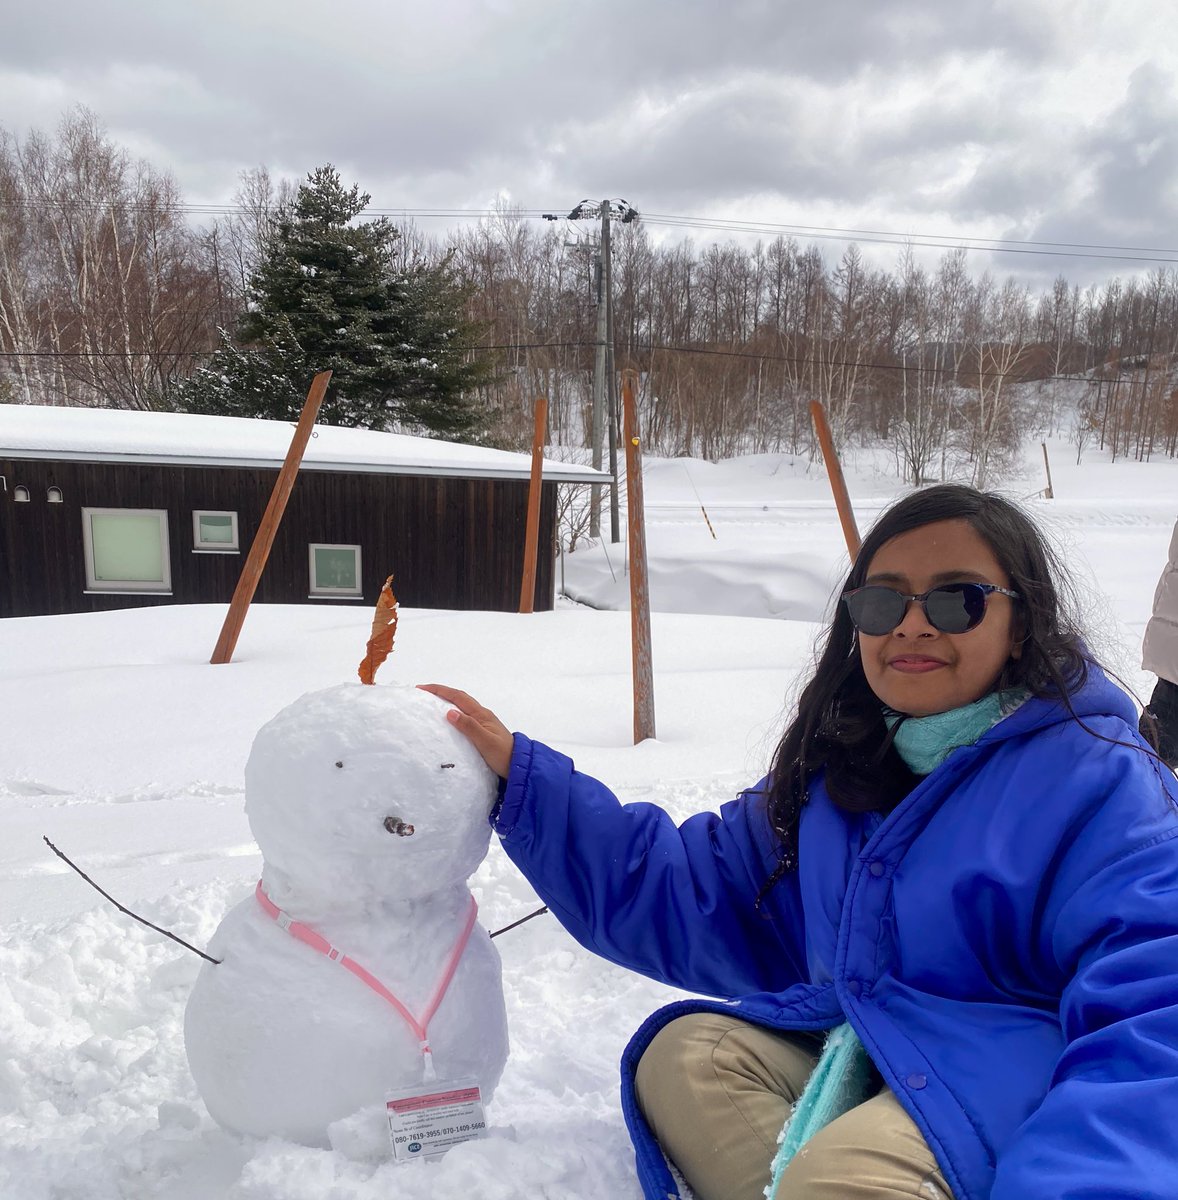 Is it Aruba - the snowman? Since it has my ID Card? If yes, Two Aruba’s in one frame, one human, and the other is a snowman! If yes, are they both climate activists? 🧐